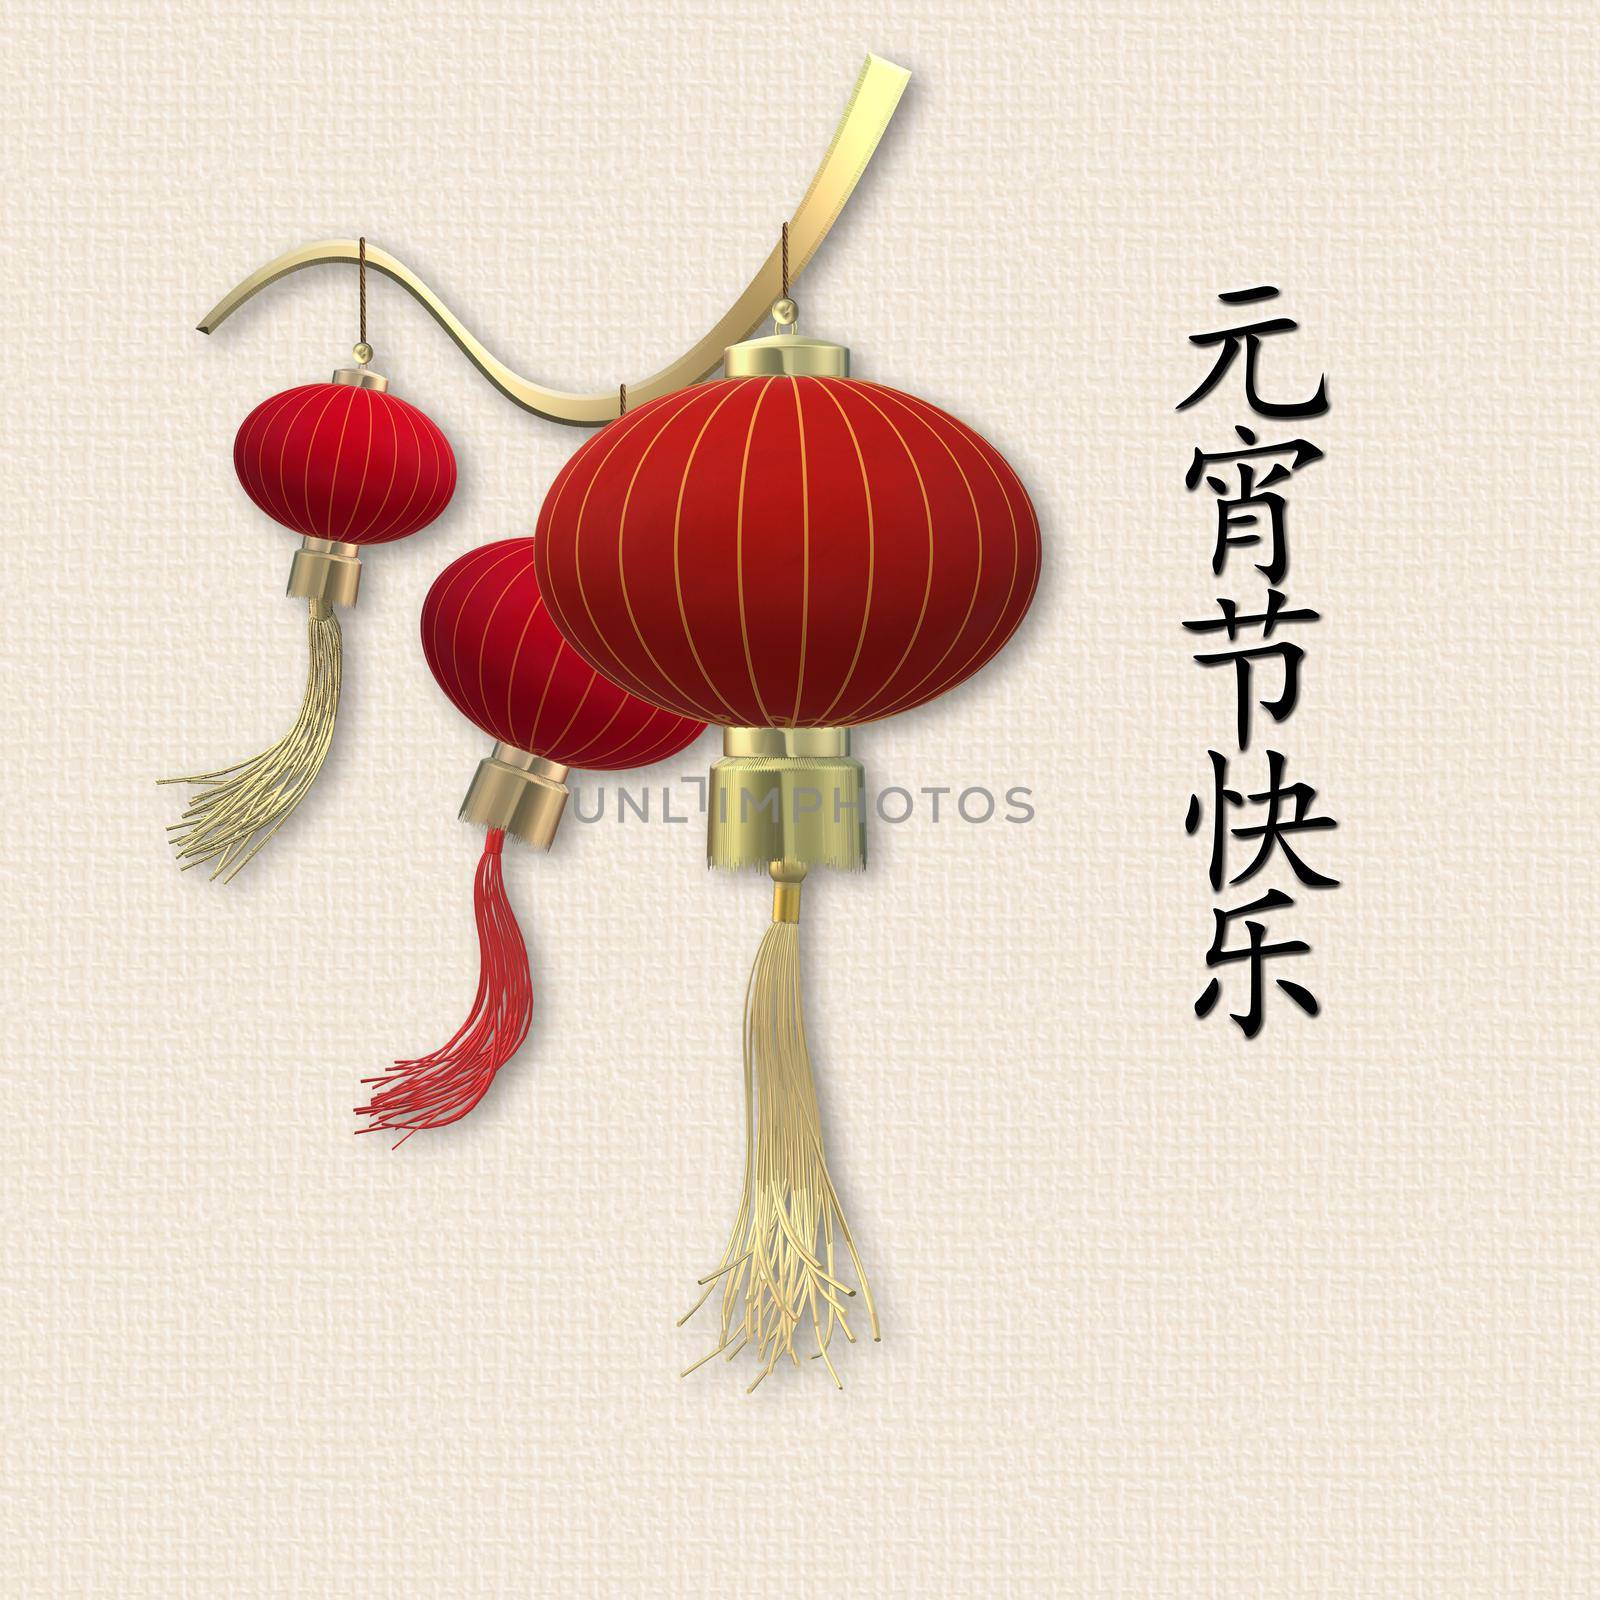 Lantern festival. Spring mid autumn Chinese festival design. Oriental Asian traditional lanterns on pastel yellow background. Place for text, Chinese text Happy Lantern festival. 3D render